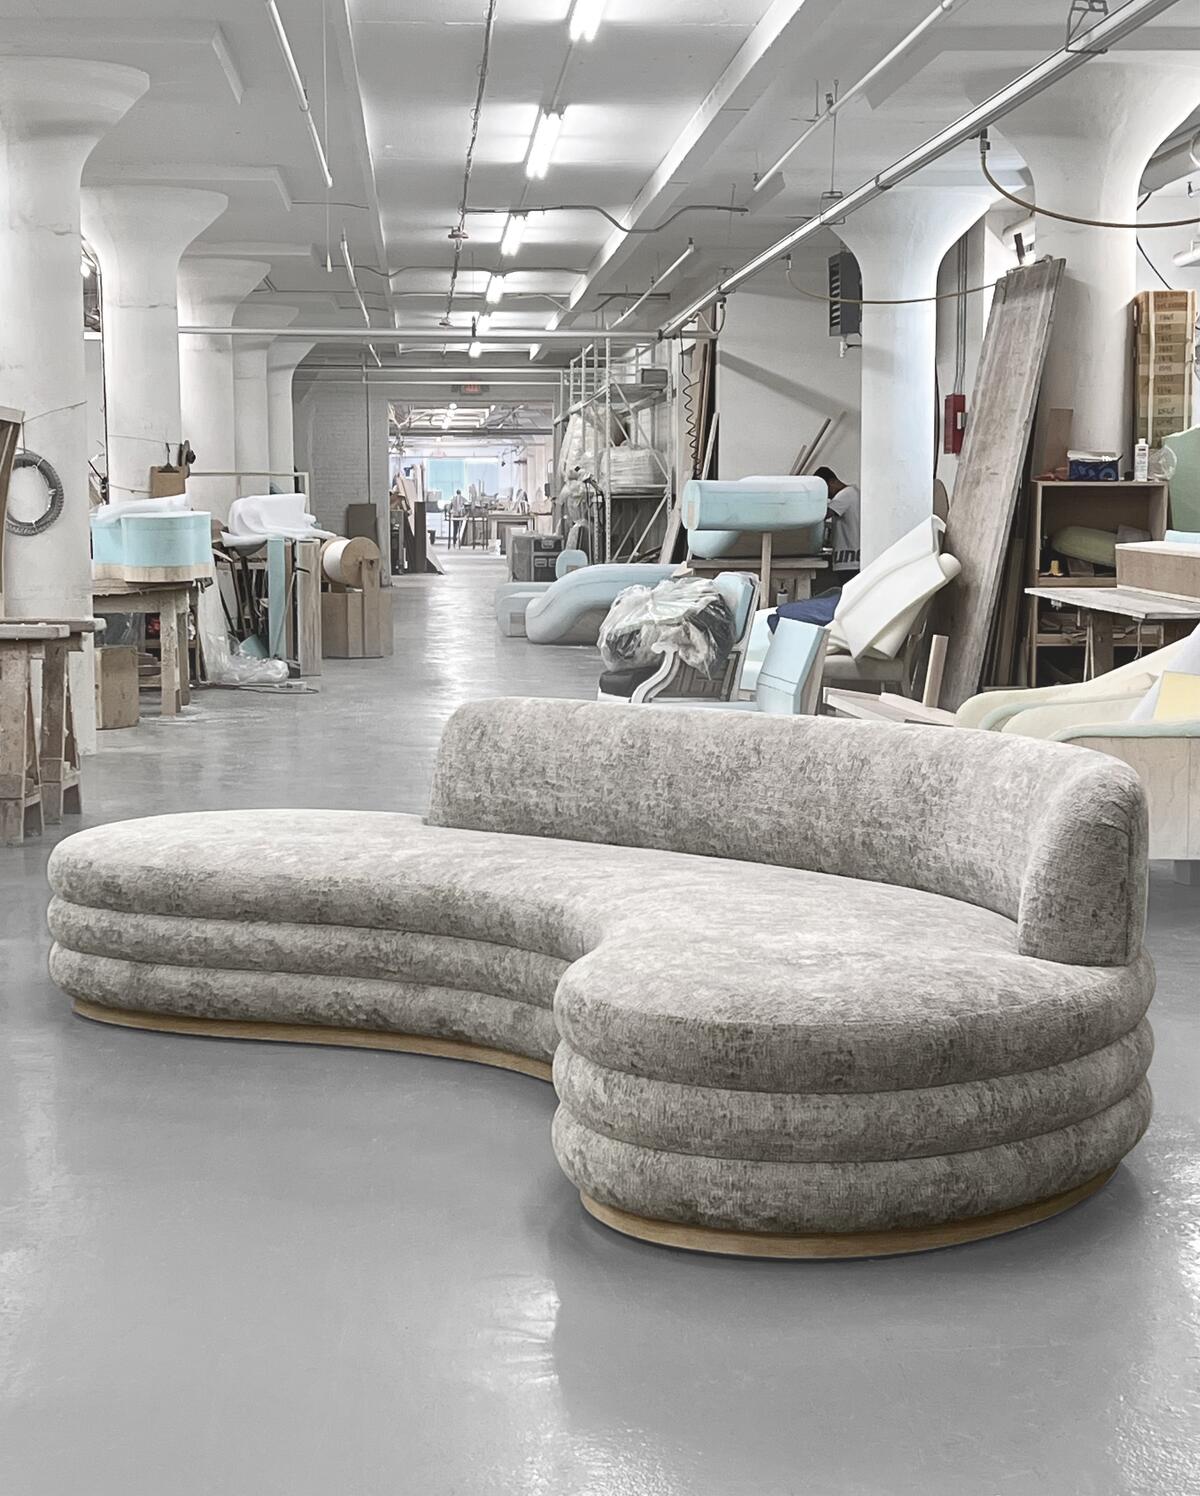 The Moussy sofa inside the Dune warehouse